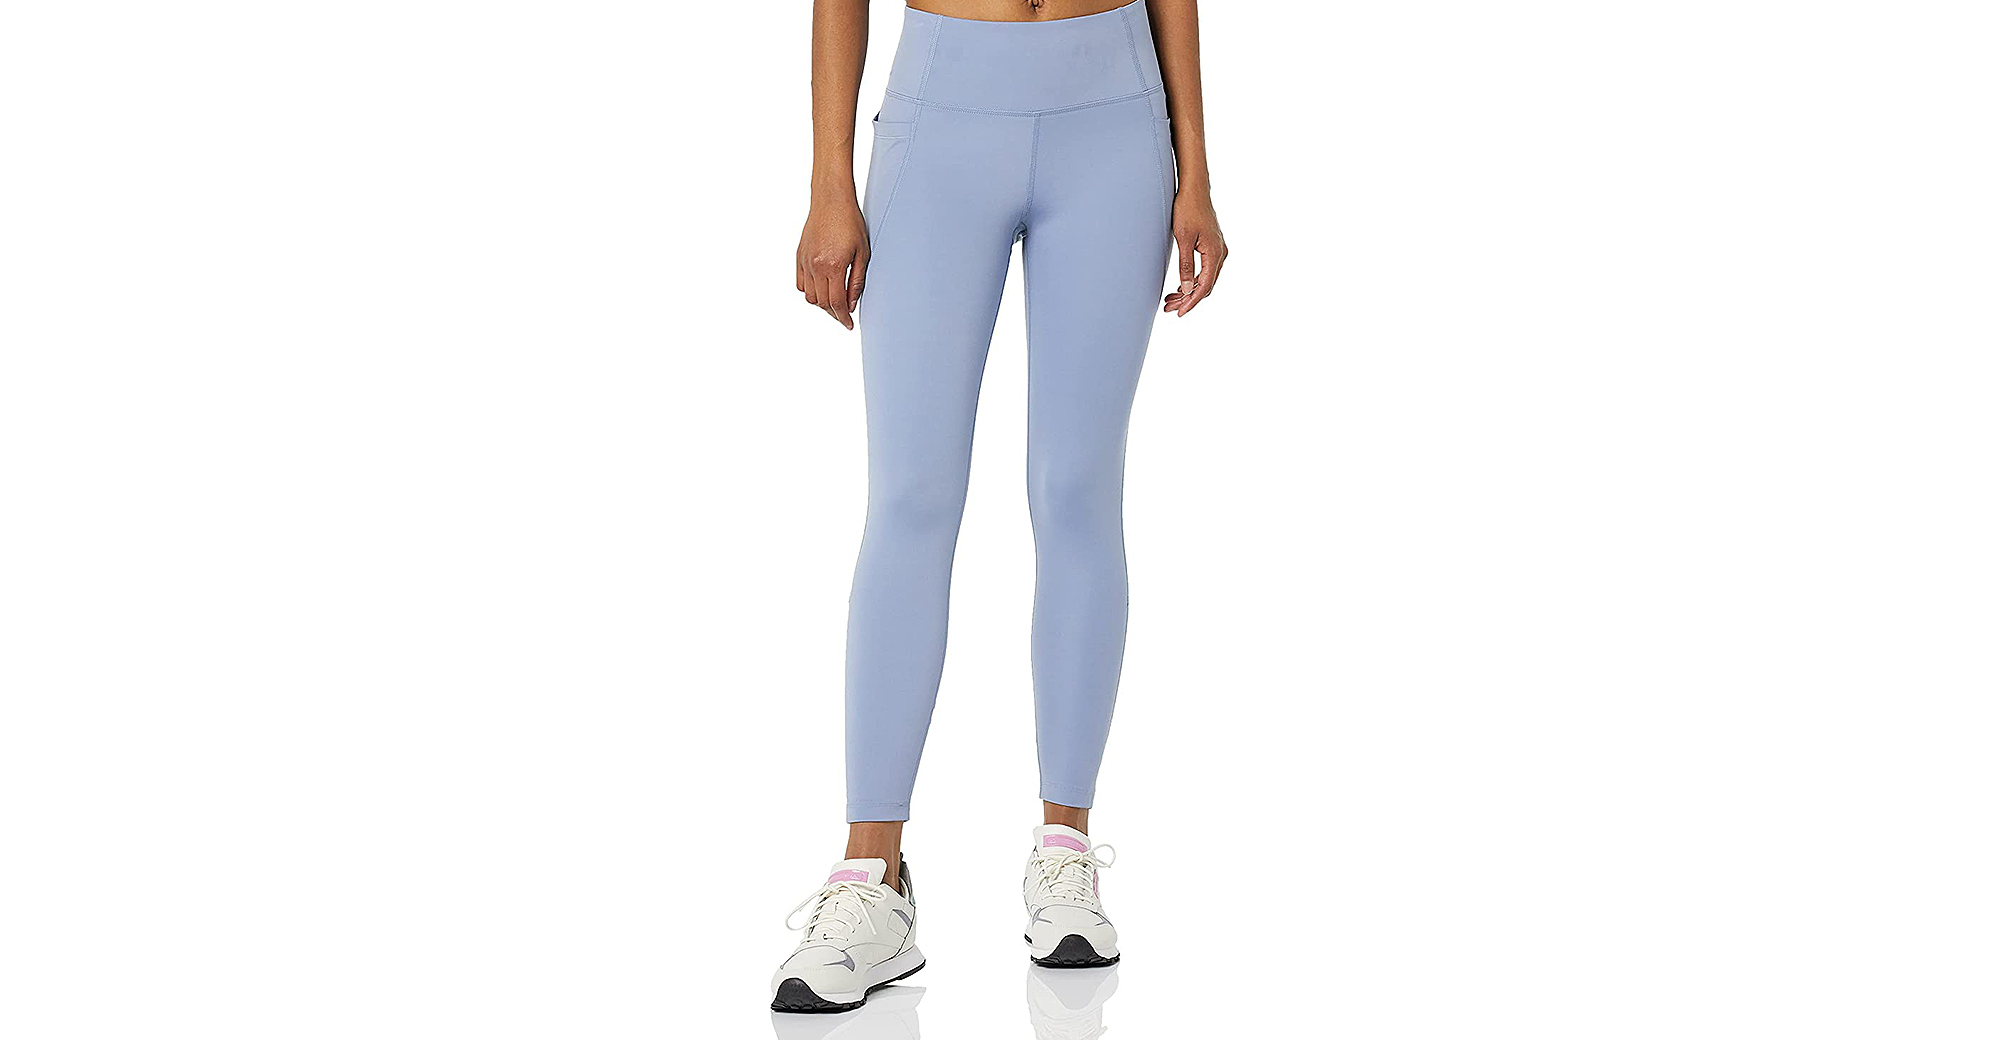 Core 10 Leggings Will Have You Looking Forward to Your Workouts